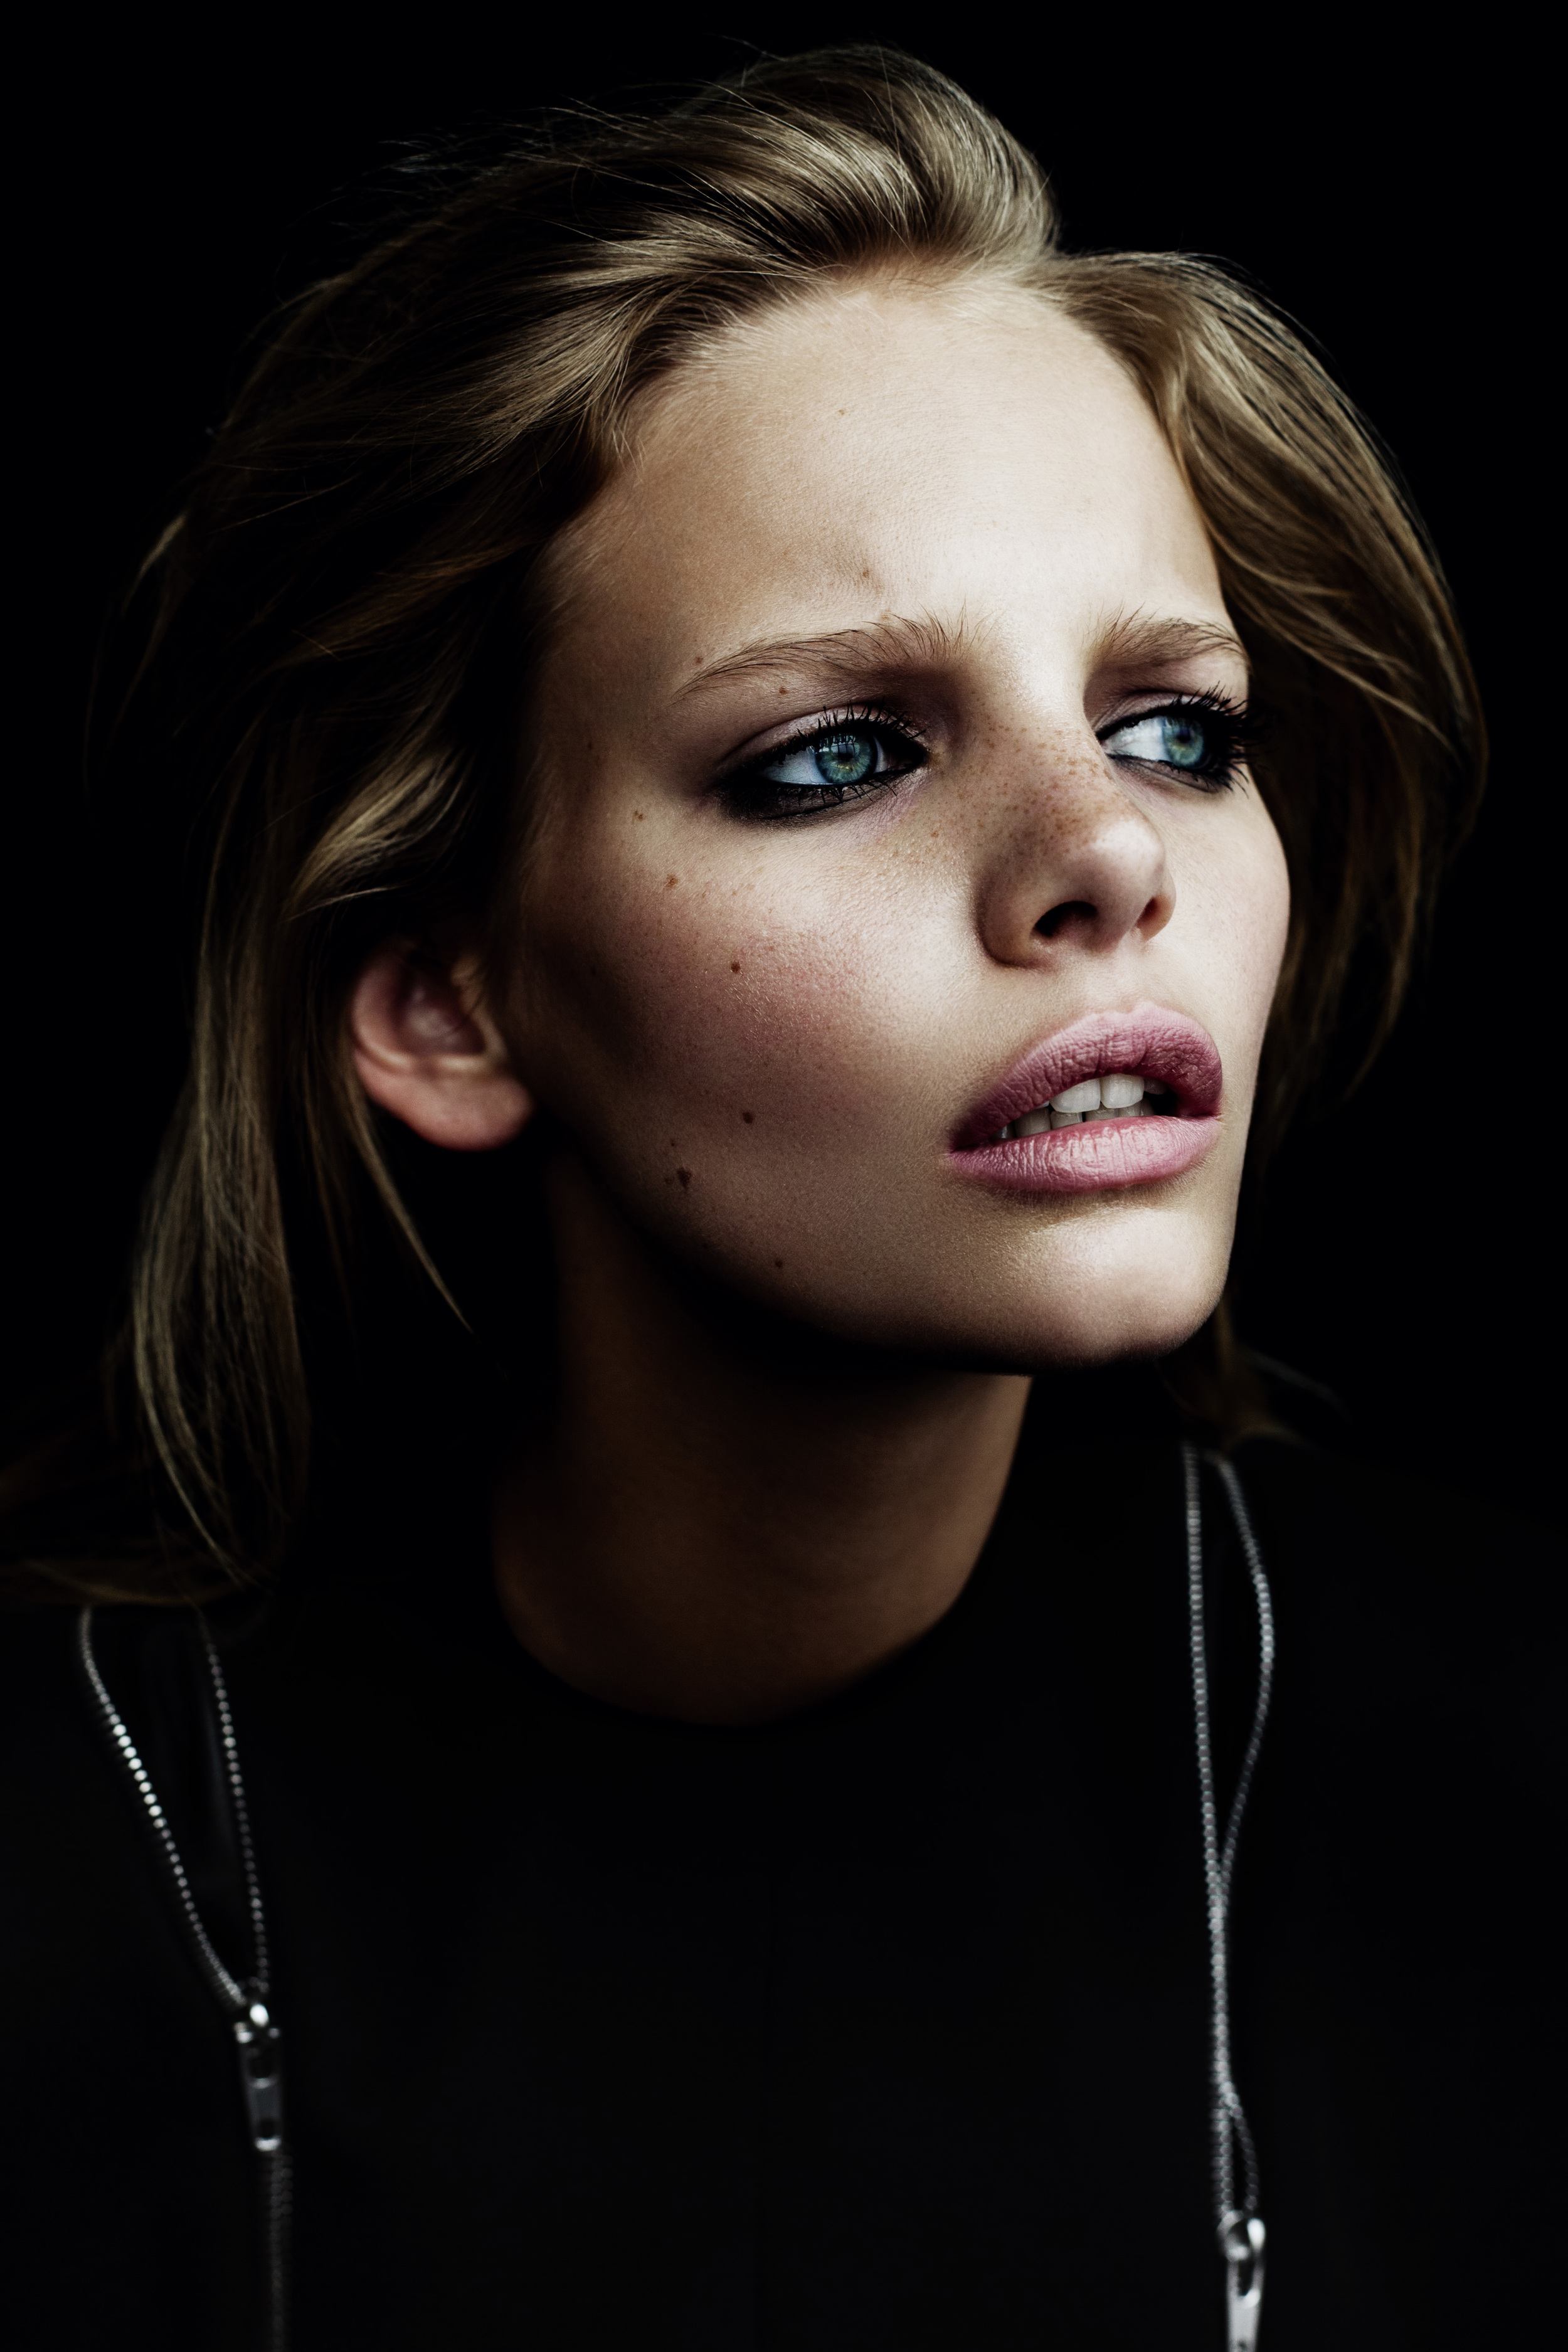 Marloes Horst - Oyster #101 — I was shot by Billy Kidd